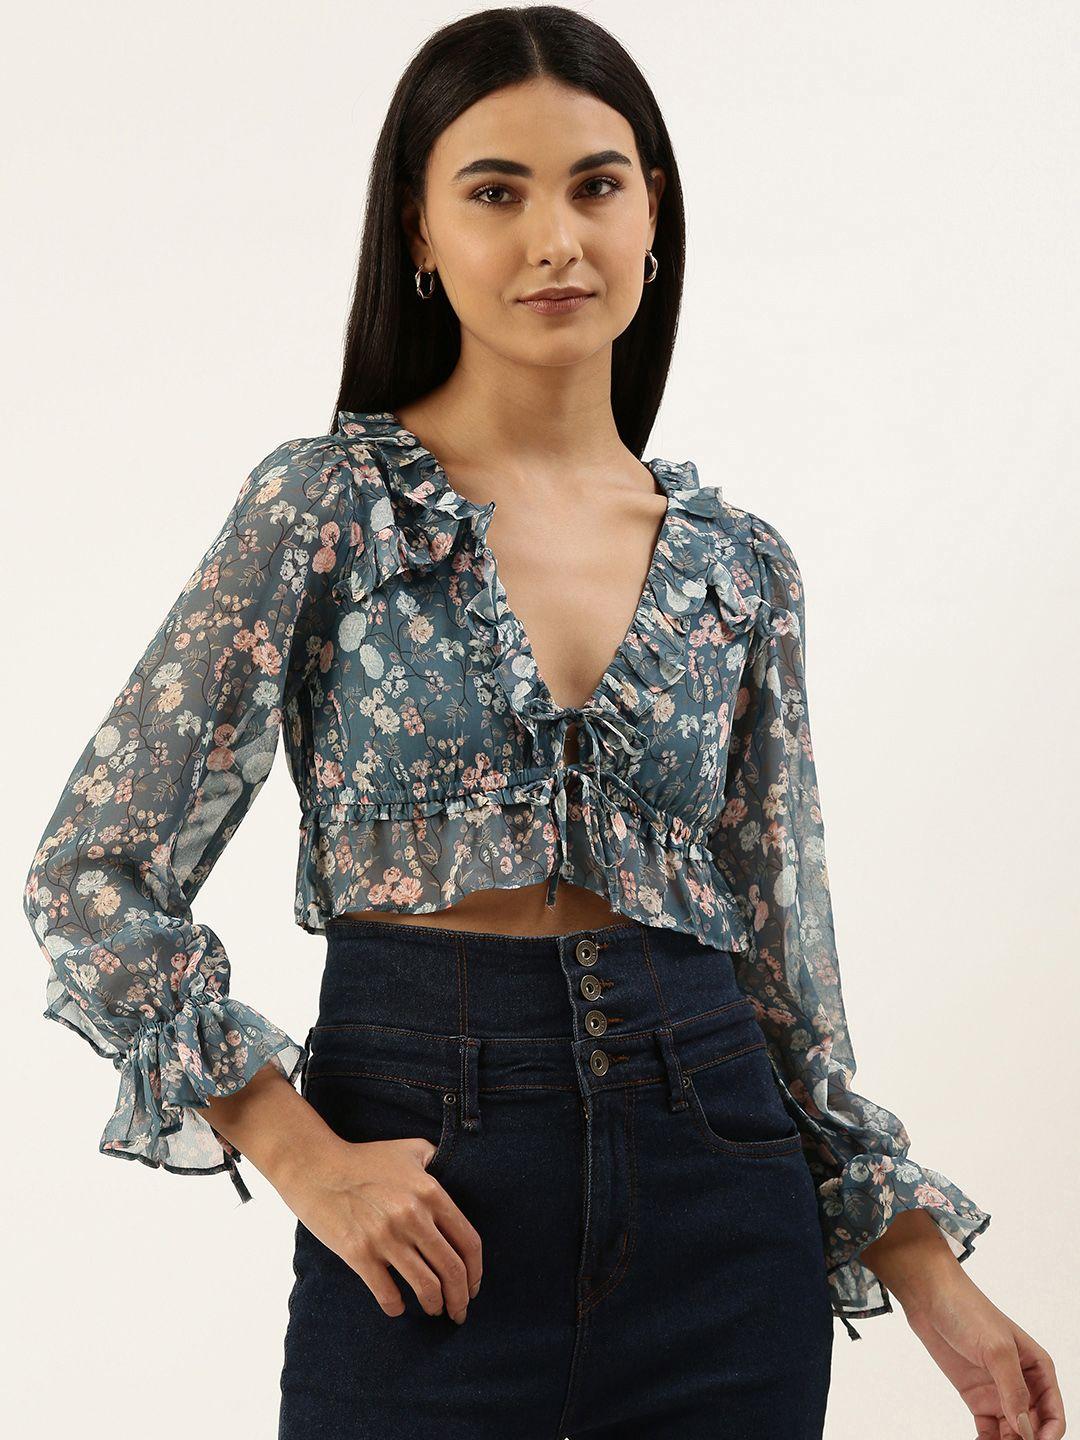 forever 21 navy blue & pink floral print ruffles empire crop top